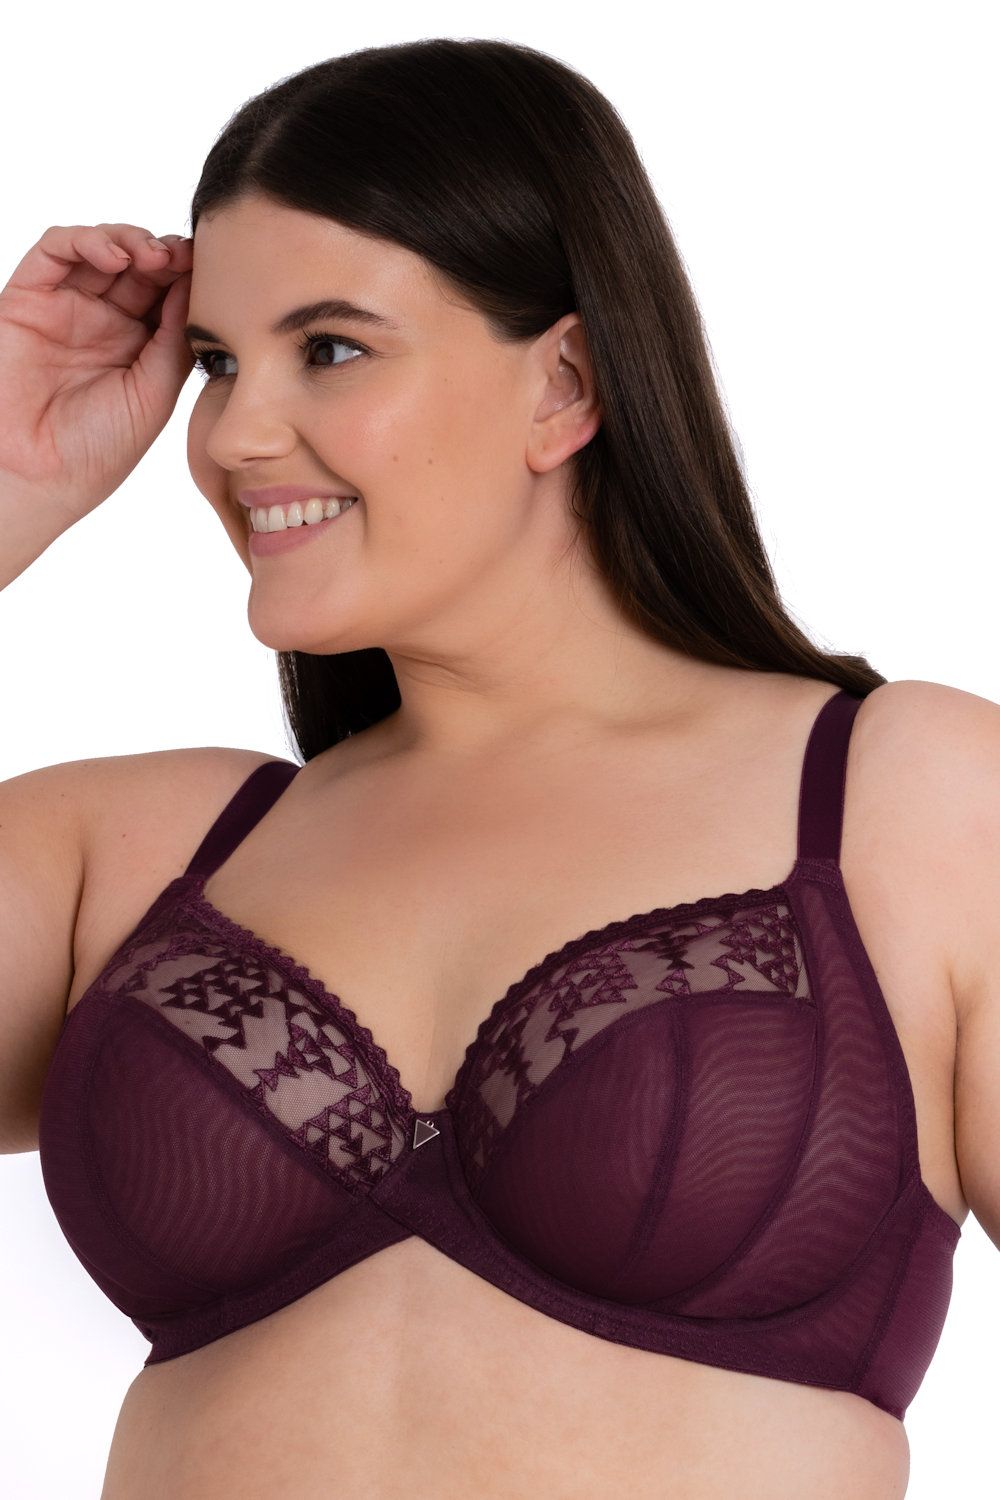 Curvy Kate Centre Stage Full Cup Plunge Bra Pink